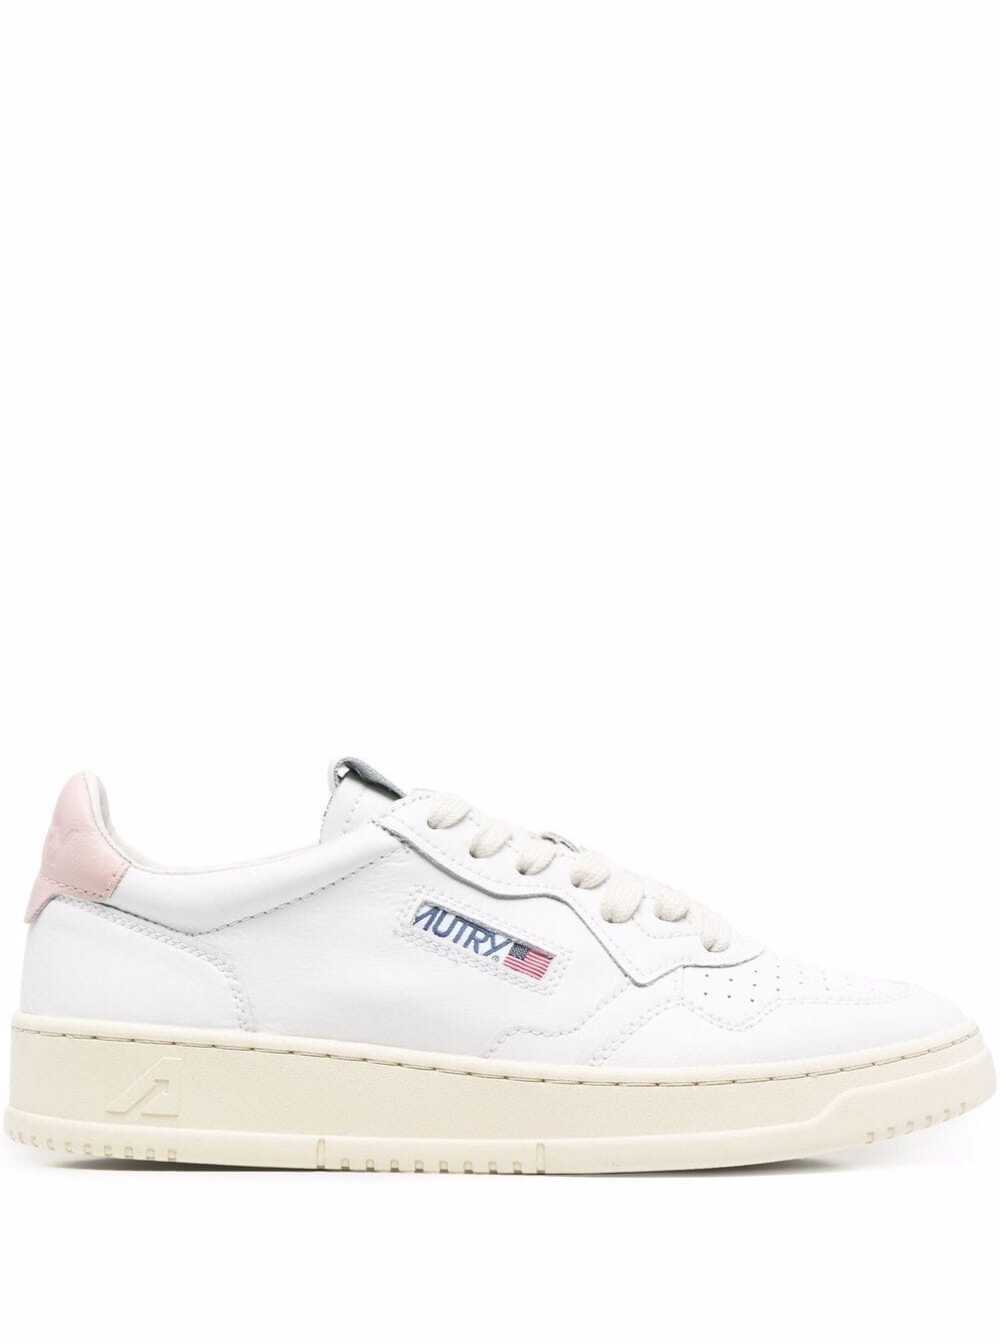 Autry Mans Low Top White And Pink Leather Sneakers